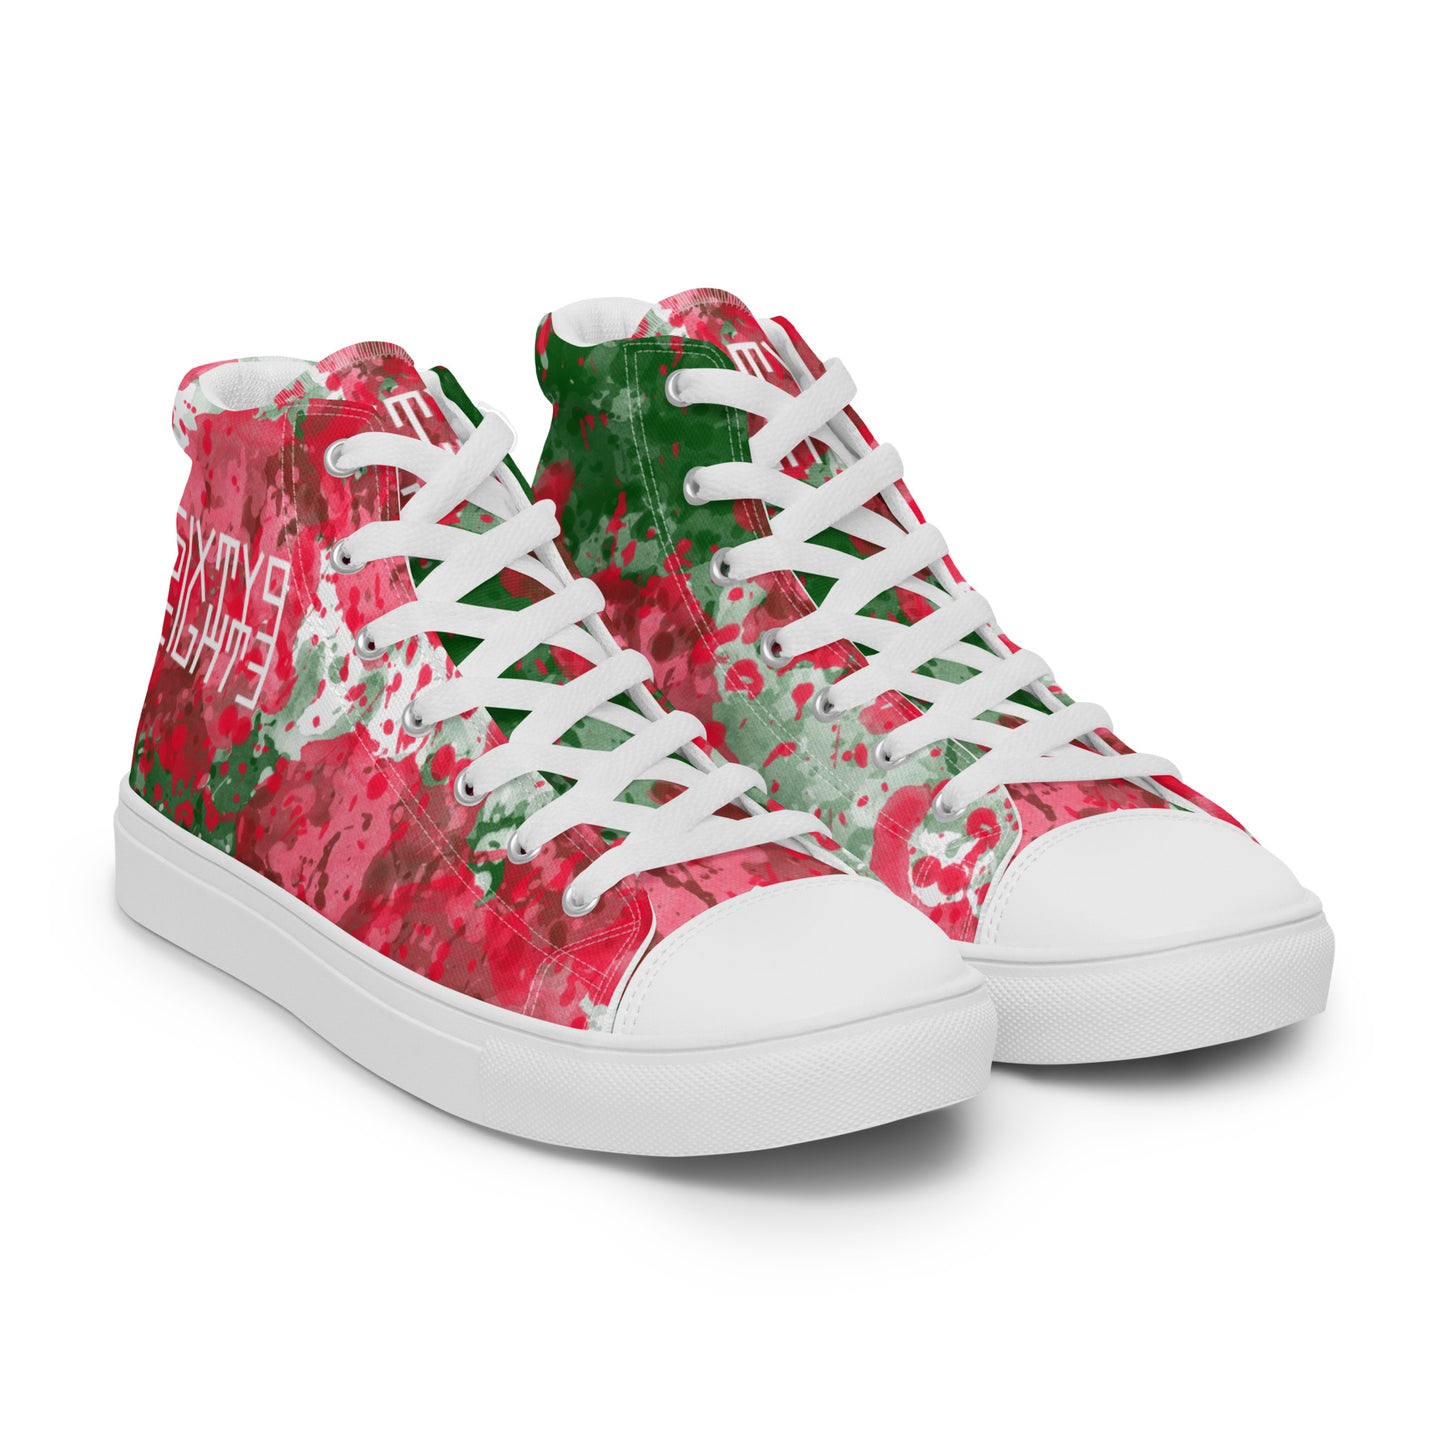 Sixty Eight 93 Logo White Crème Rose Green Men's High Top Shoes